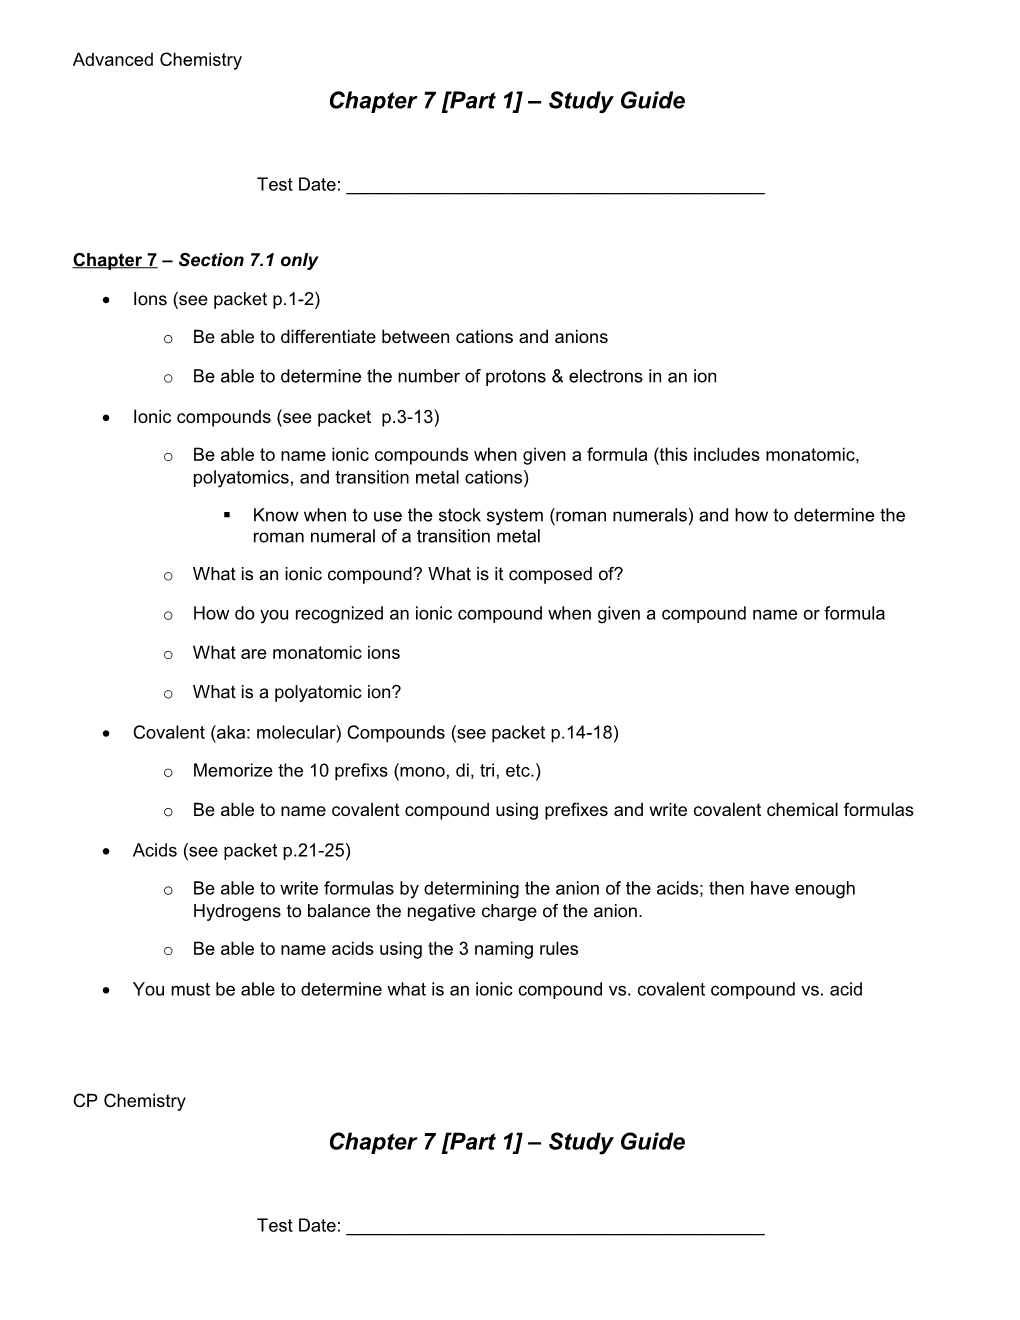 Chapter 7 Part 1 Study Guide